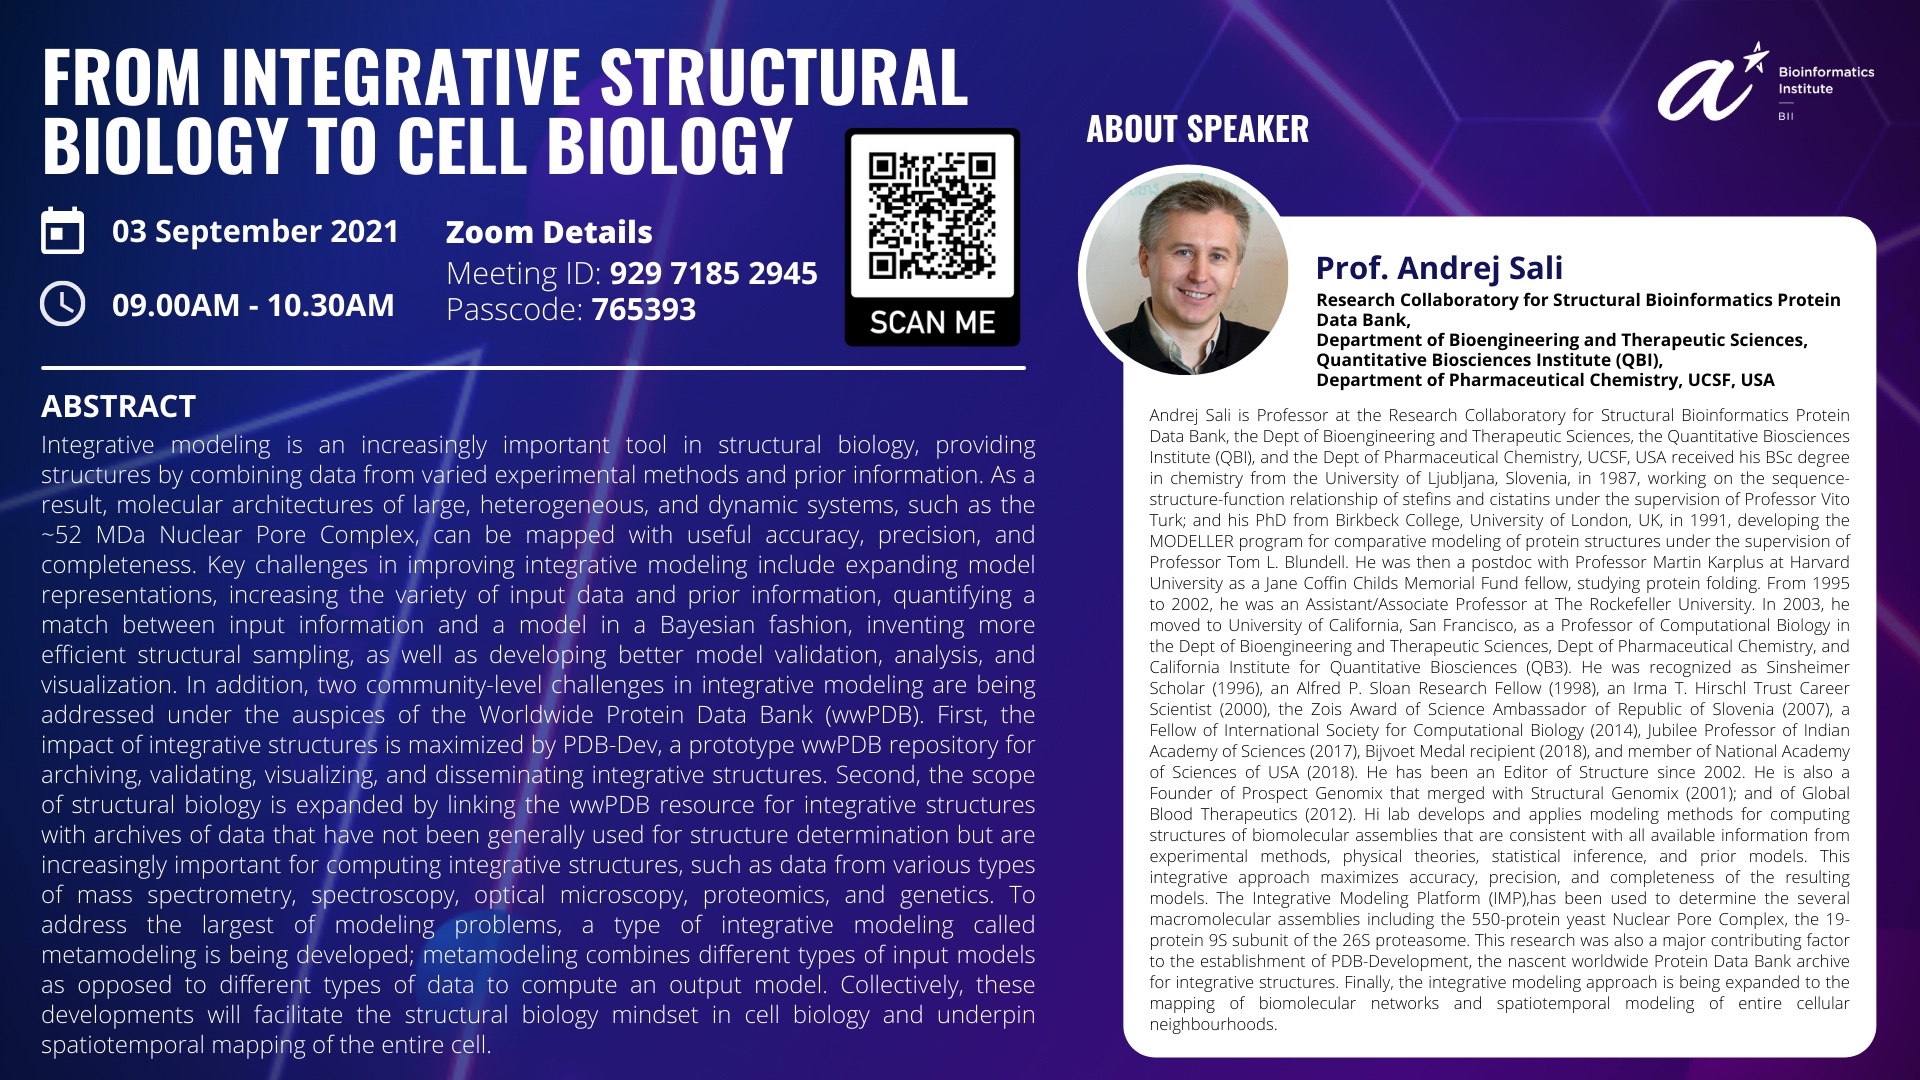 Talk by Poster: Prof. Andrej Sali - From Integrative Structural Biology to Cell Biology